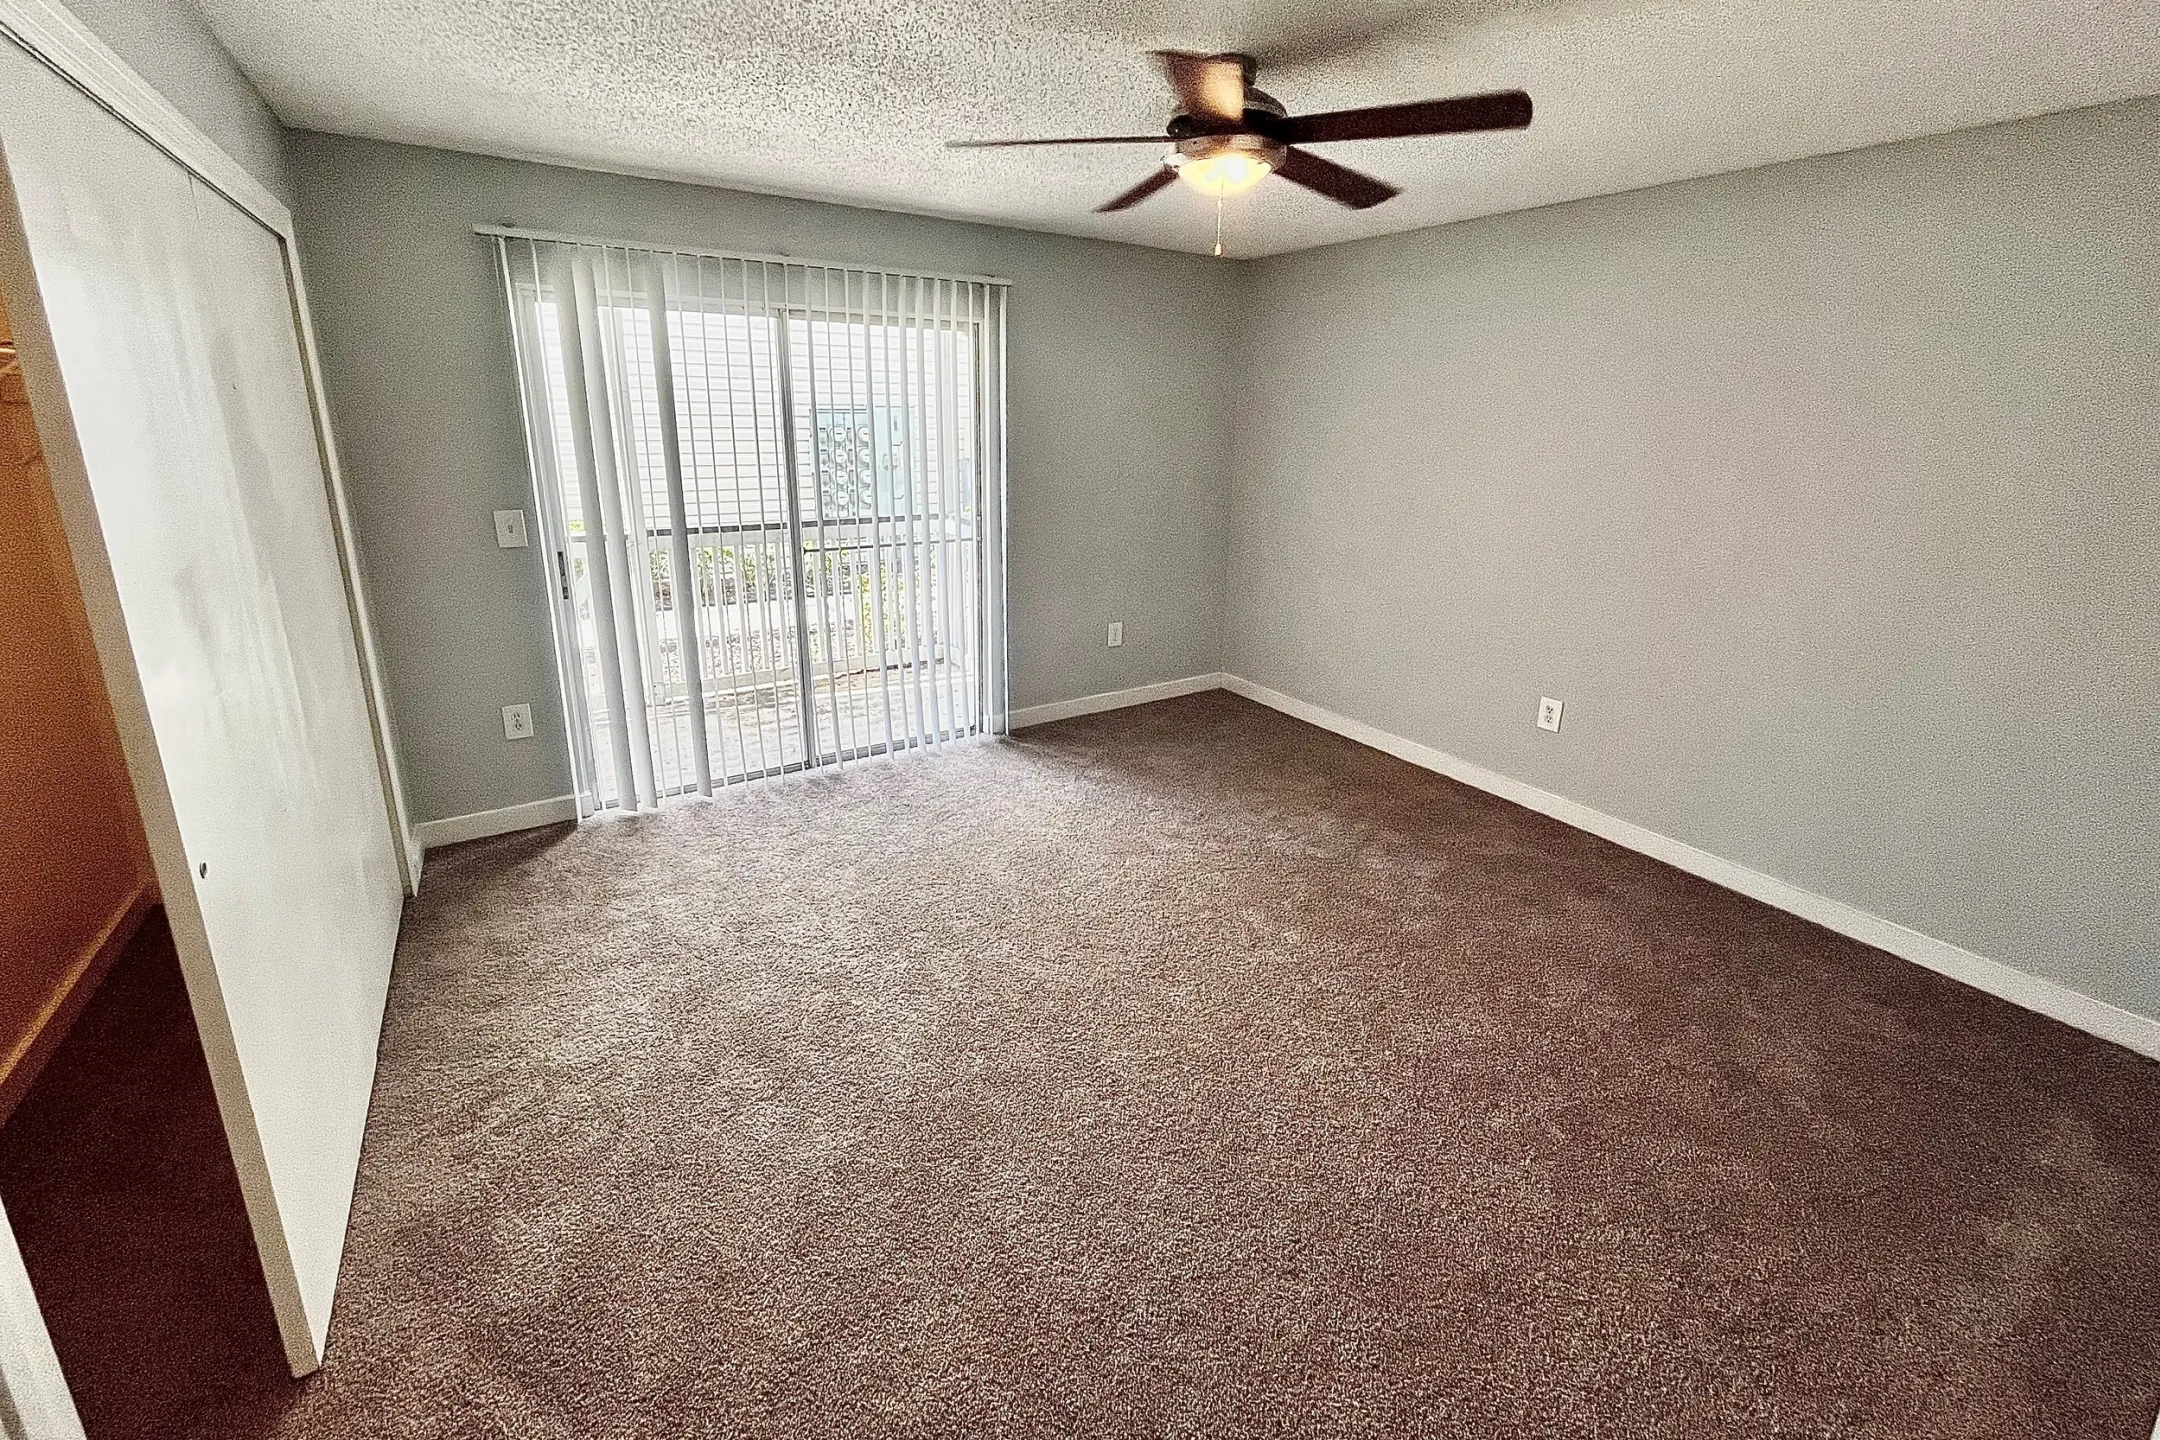 Living Room - Puritan Place Apartments - Tampa, FL